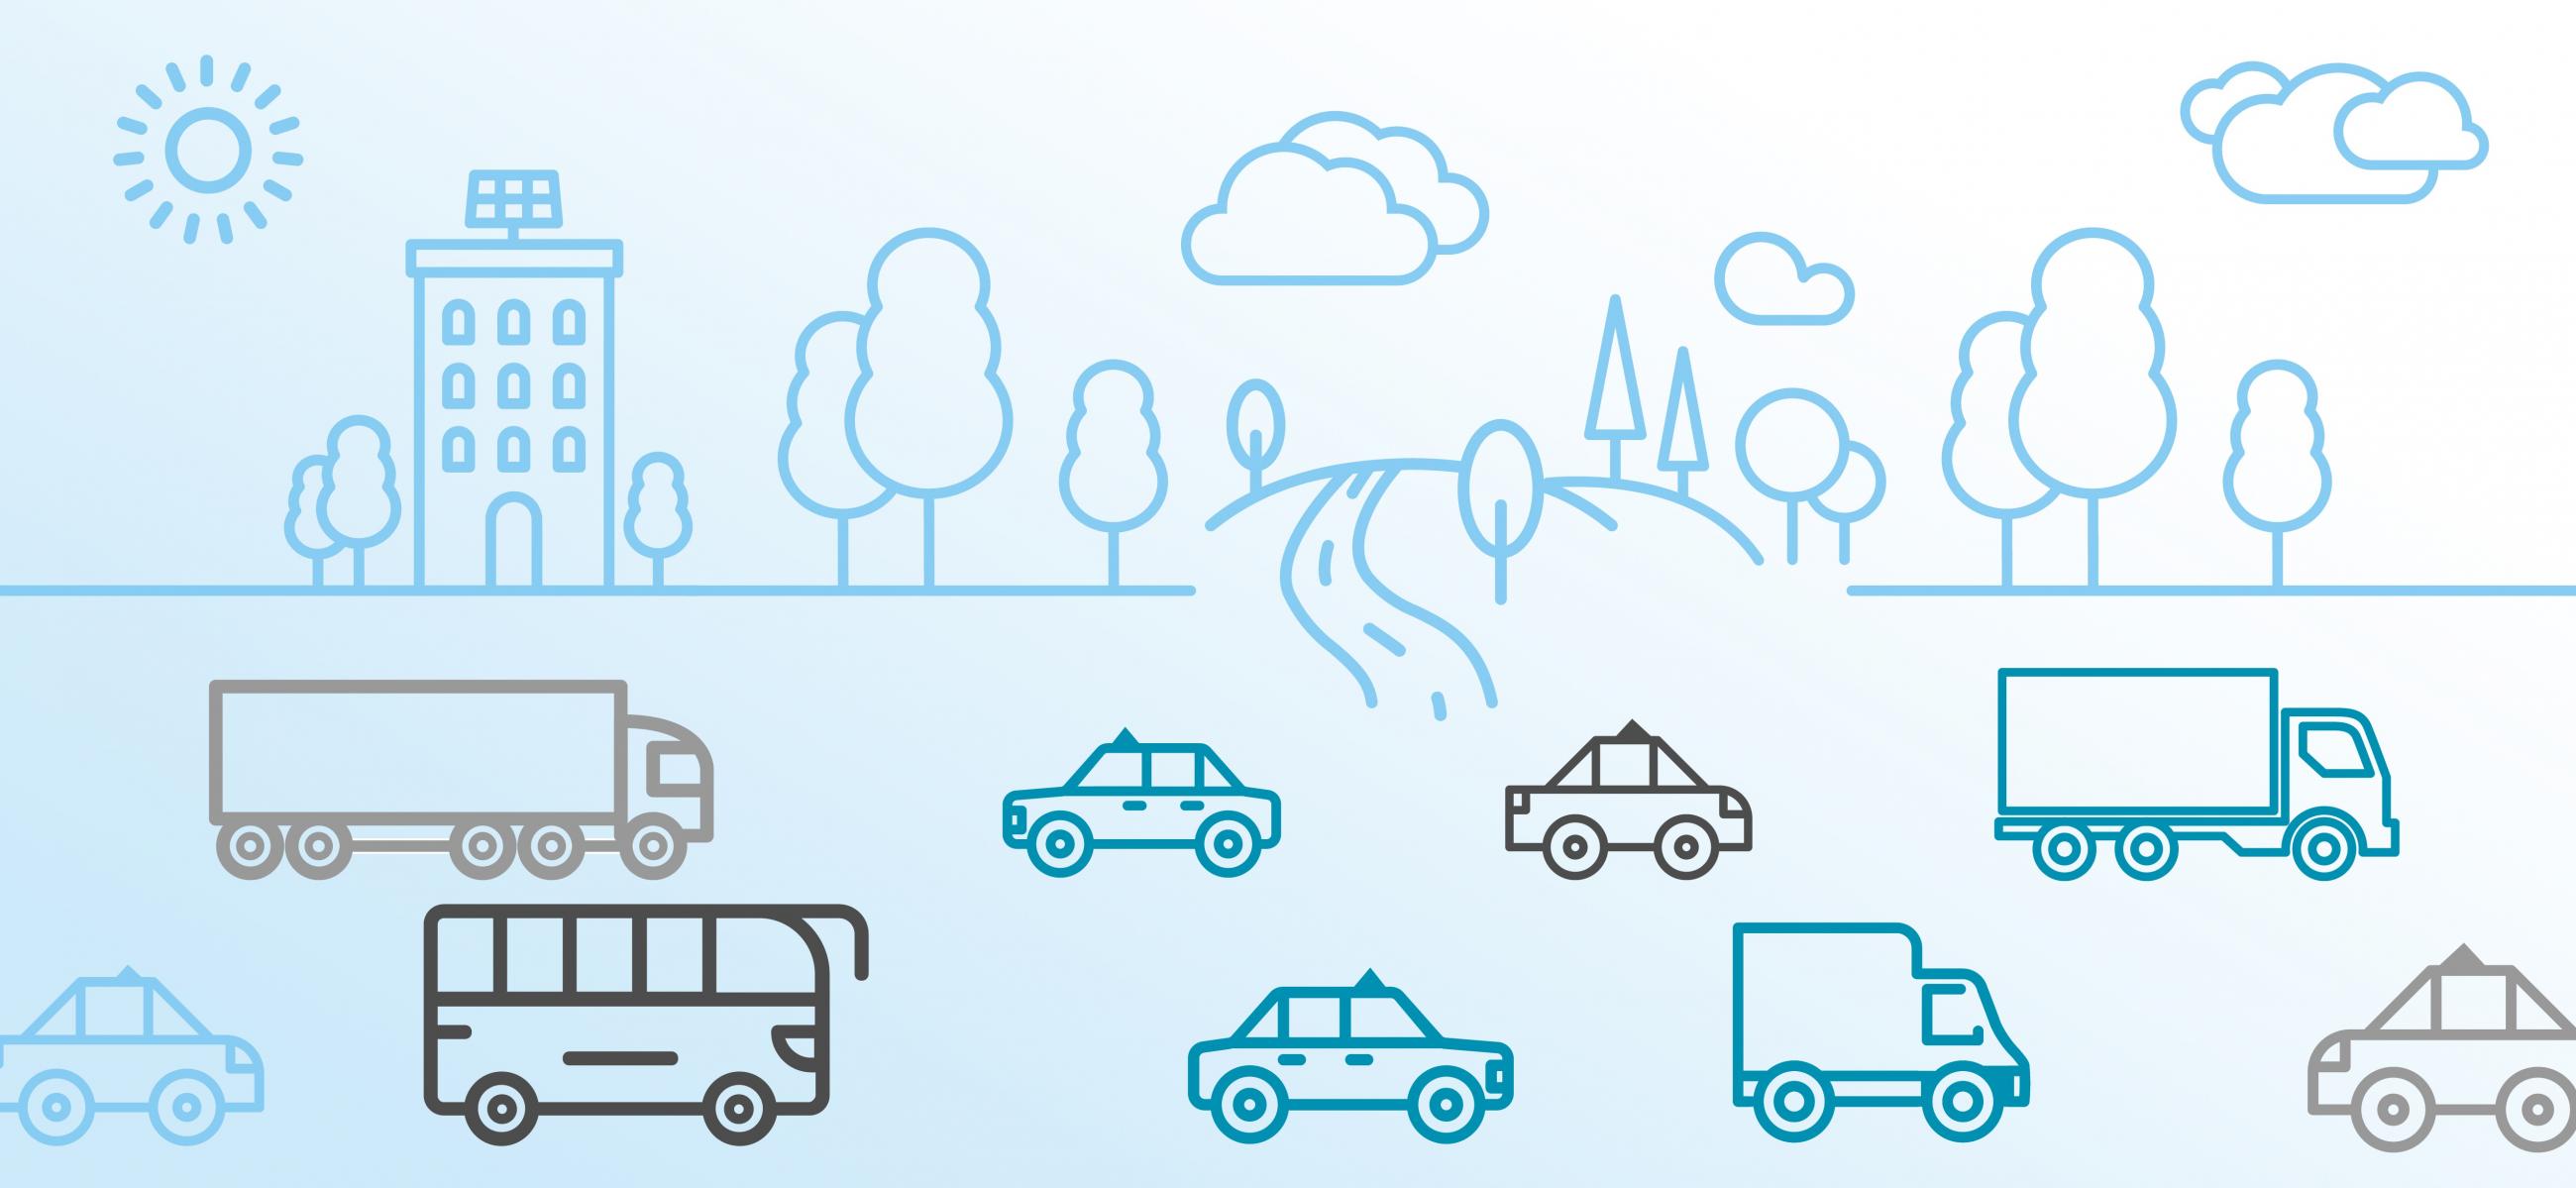 Artwork showing vehicles and trees